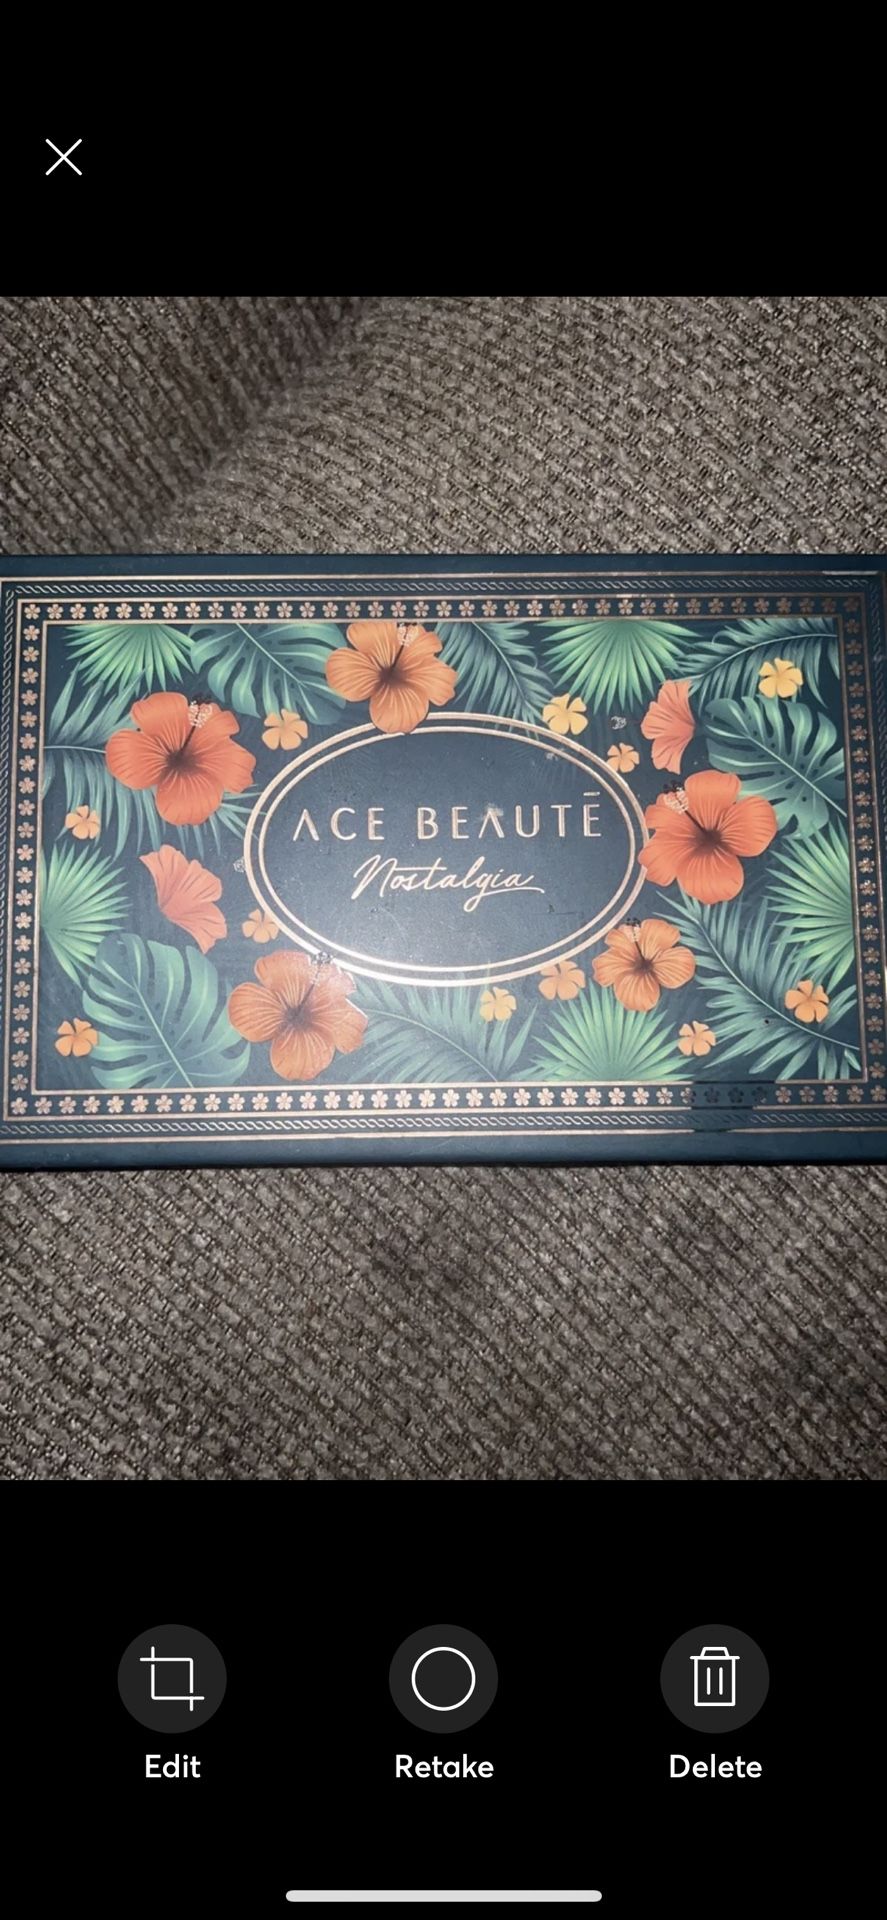 Never Used!! Brand NEW!! Ace Beaute Nostalgia Palette